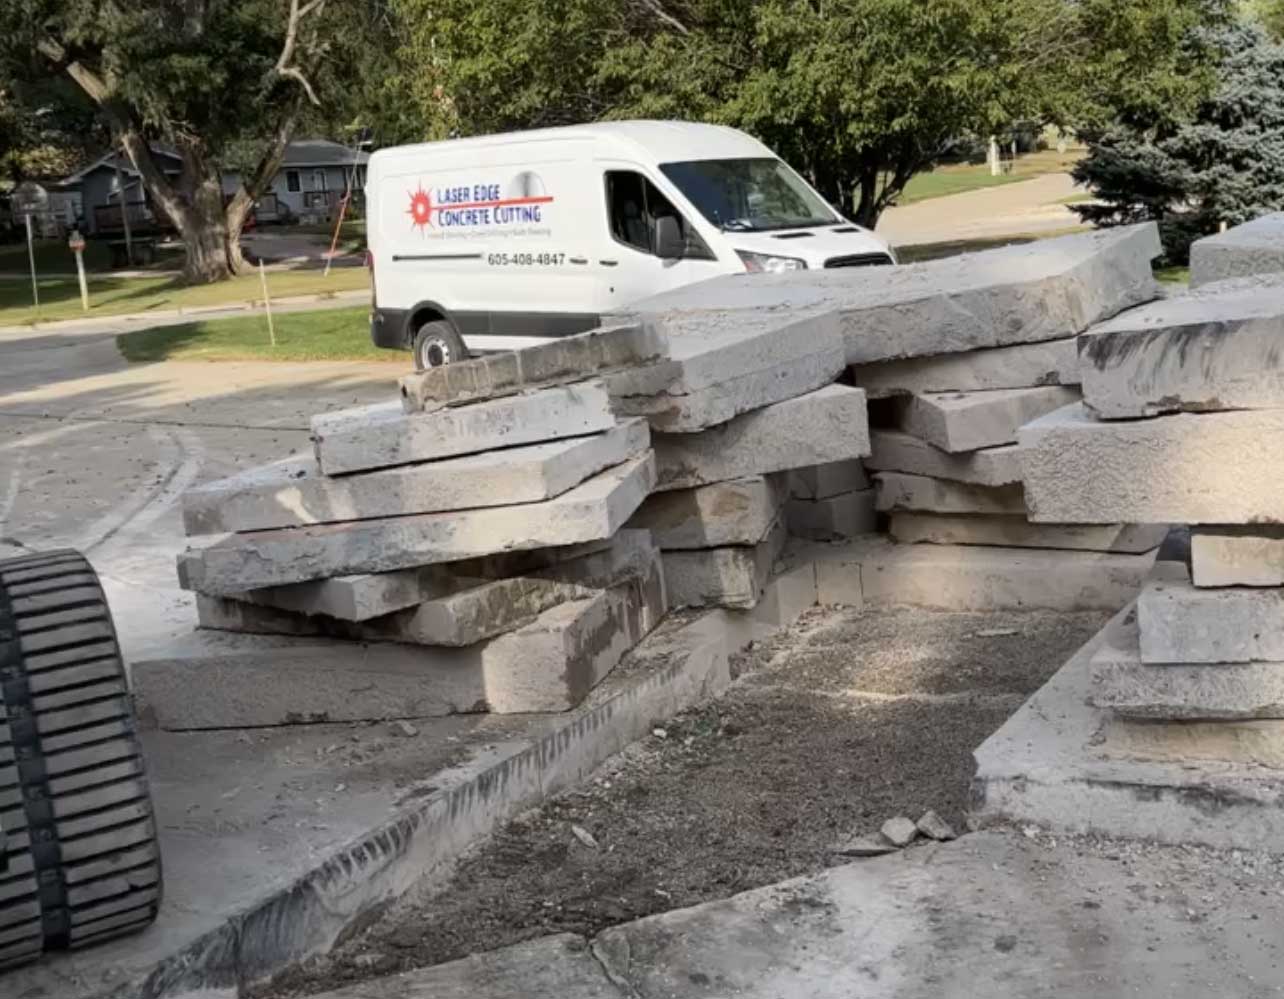 Welcome to Laser Edge Concrete Cutting LLC, your premier concrete contractor serving Jackson, NE, and surrounding areas. With years of expertise in precision cutting, trenching, and core drilling, we specialize in a wide range of concrete services tailored to your needs.